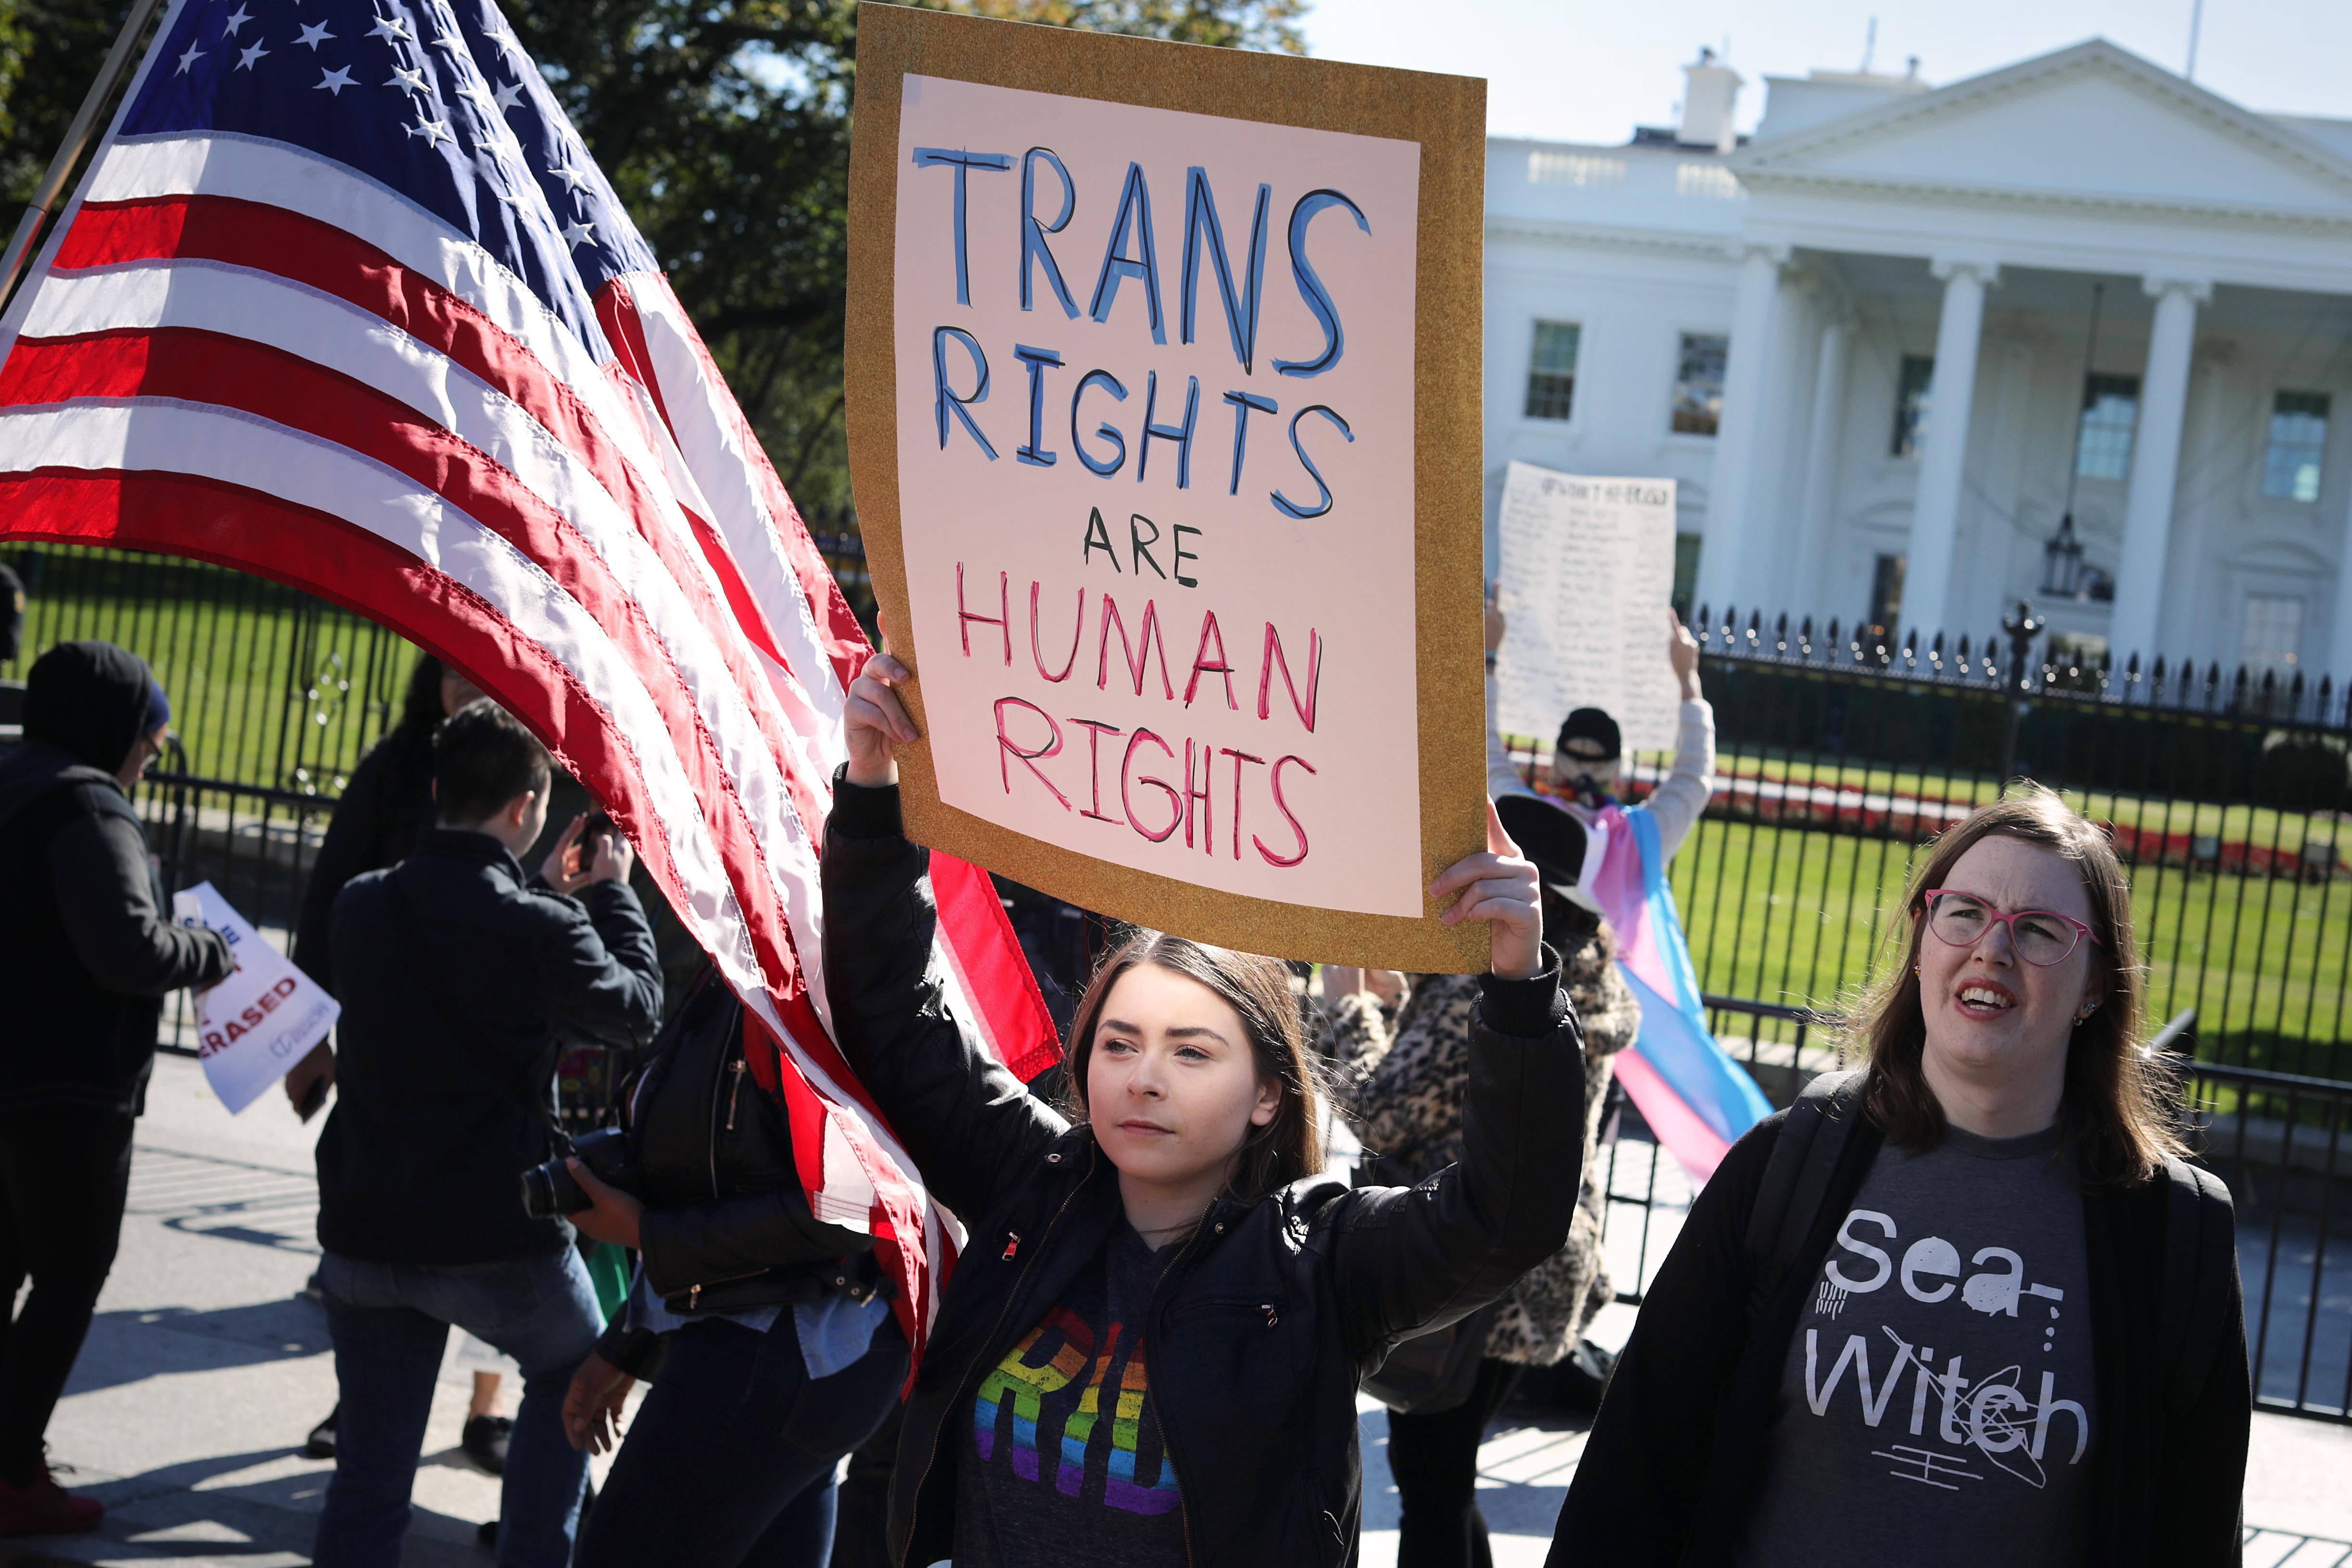 A protester carries a "trans rights are human rights" sign at a transgender rights rally in front of the White House.